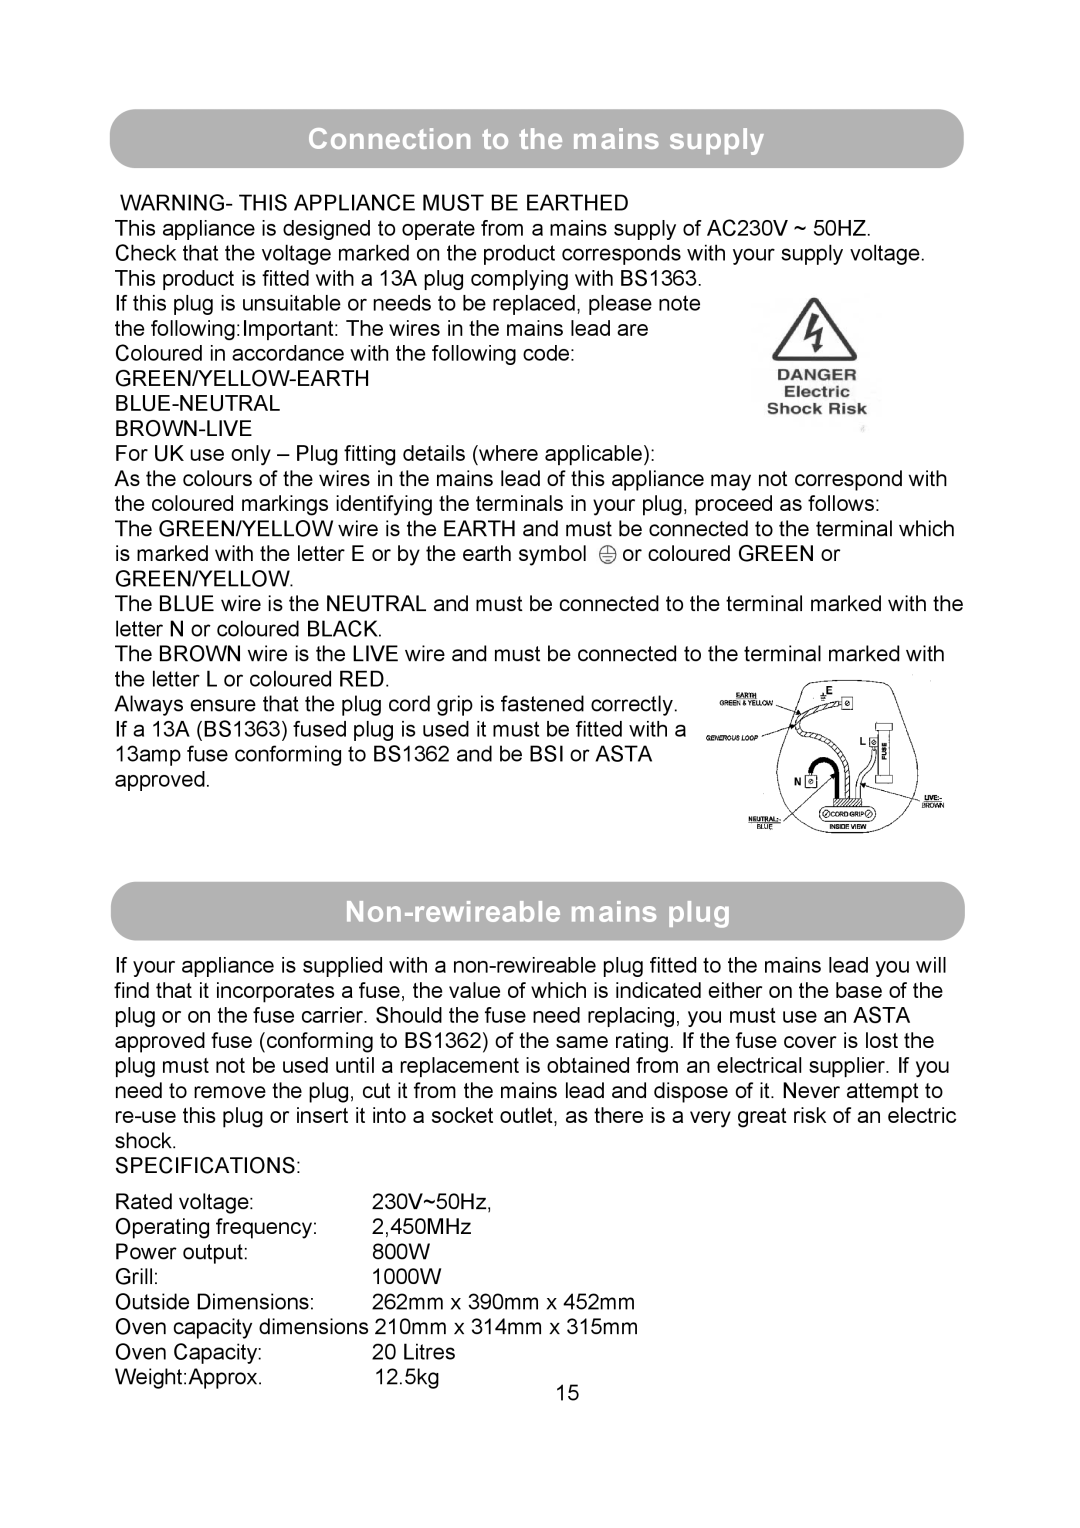 Russell Hobbs RHM2010S user manual Connection to the mains supply, Non-rewireable mains plug 